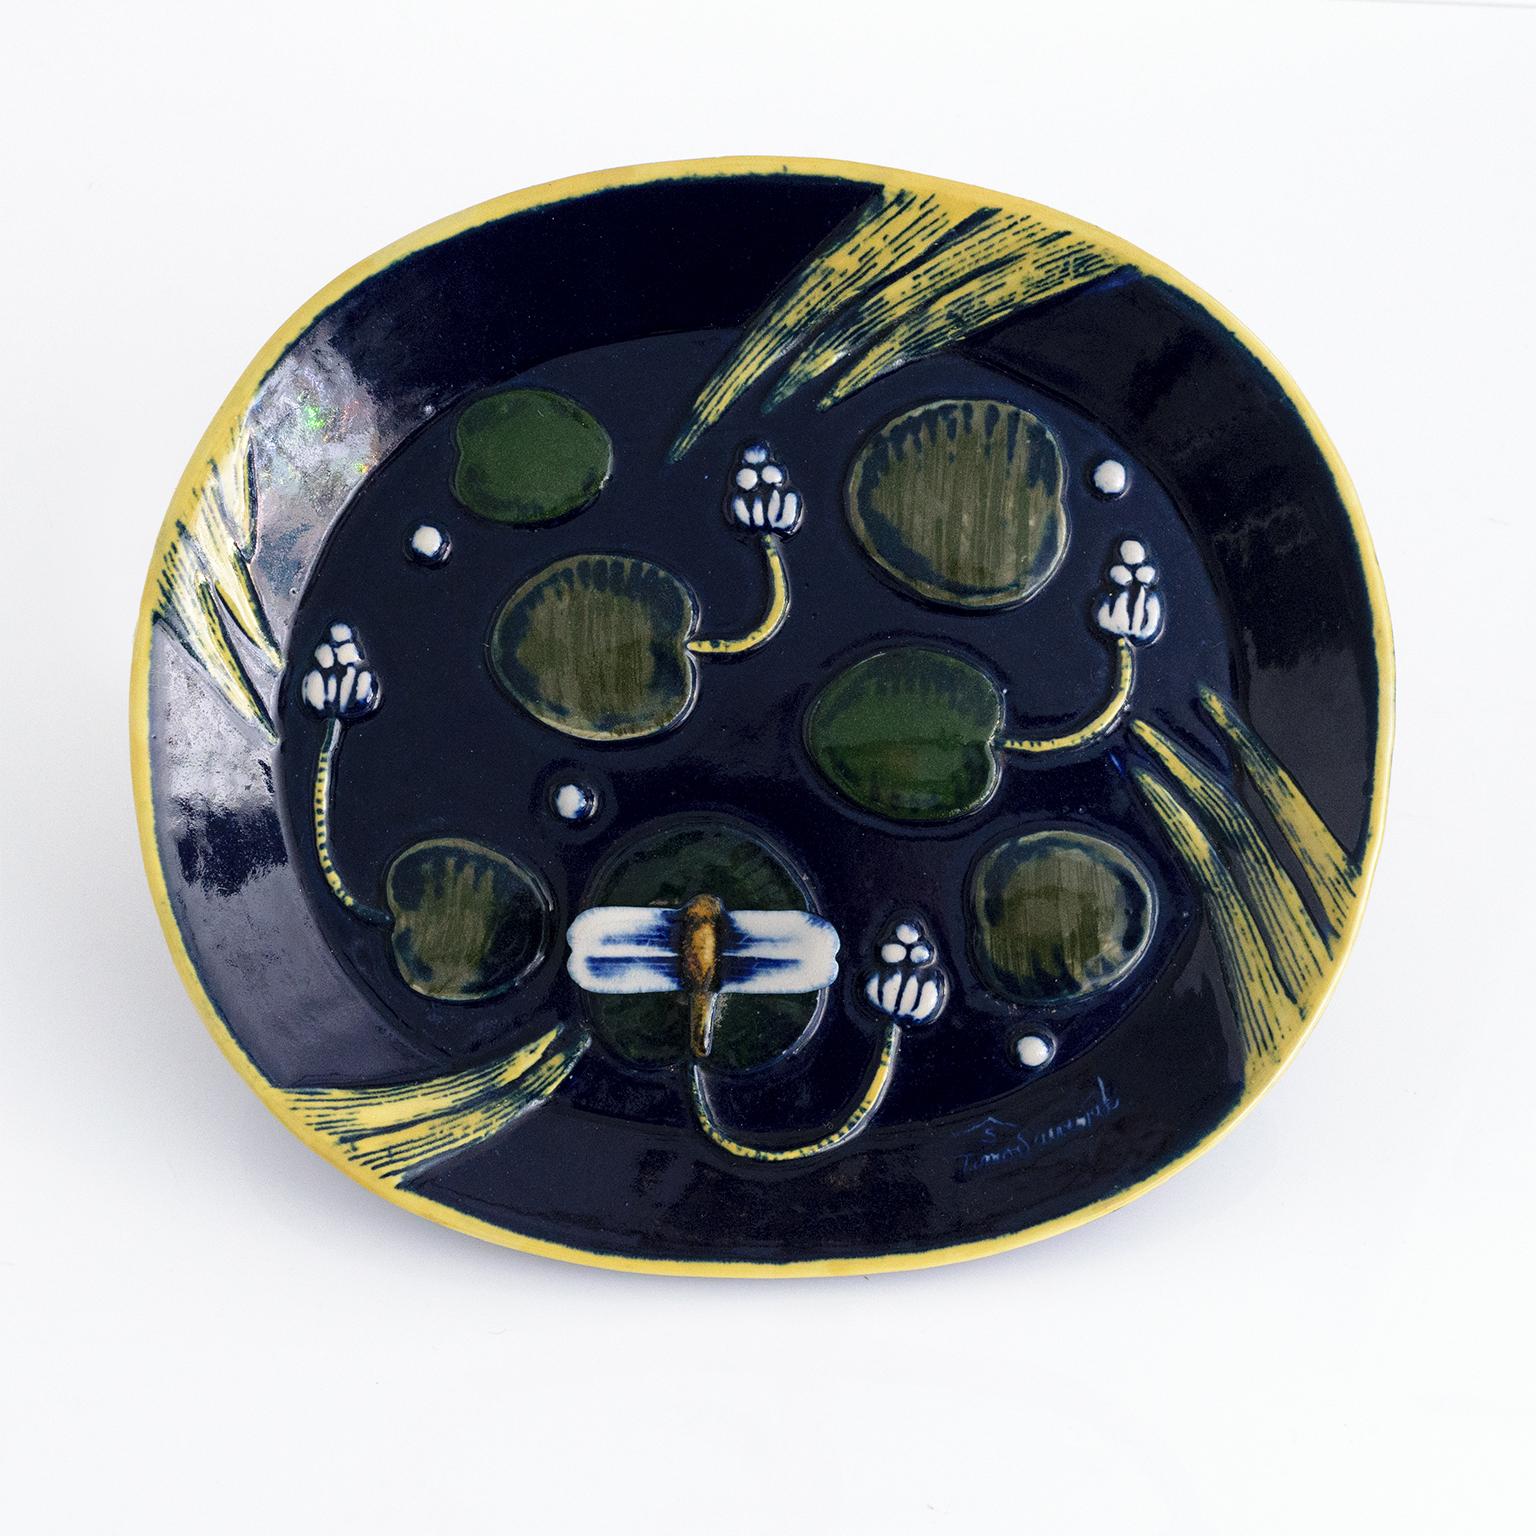 Timo Sarvimäki stoneware platter depicting a deep blue pond or lake surface with lily pads, and a dragon fly in relief. Produced for Designhuset, Stockholm 1960's. 

Measures: Length: 13.5” Width: 12“ Height: 1.5.